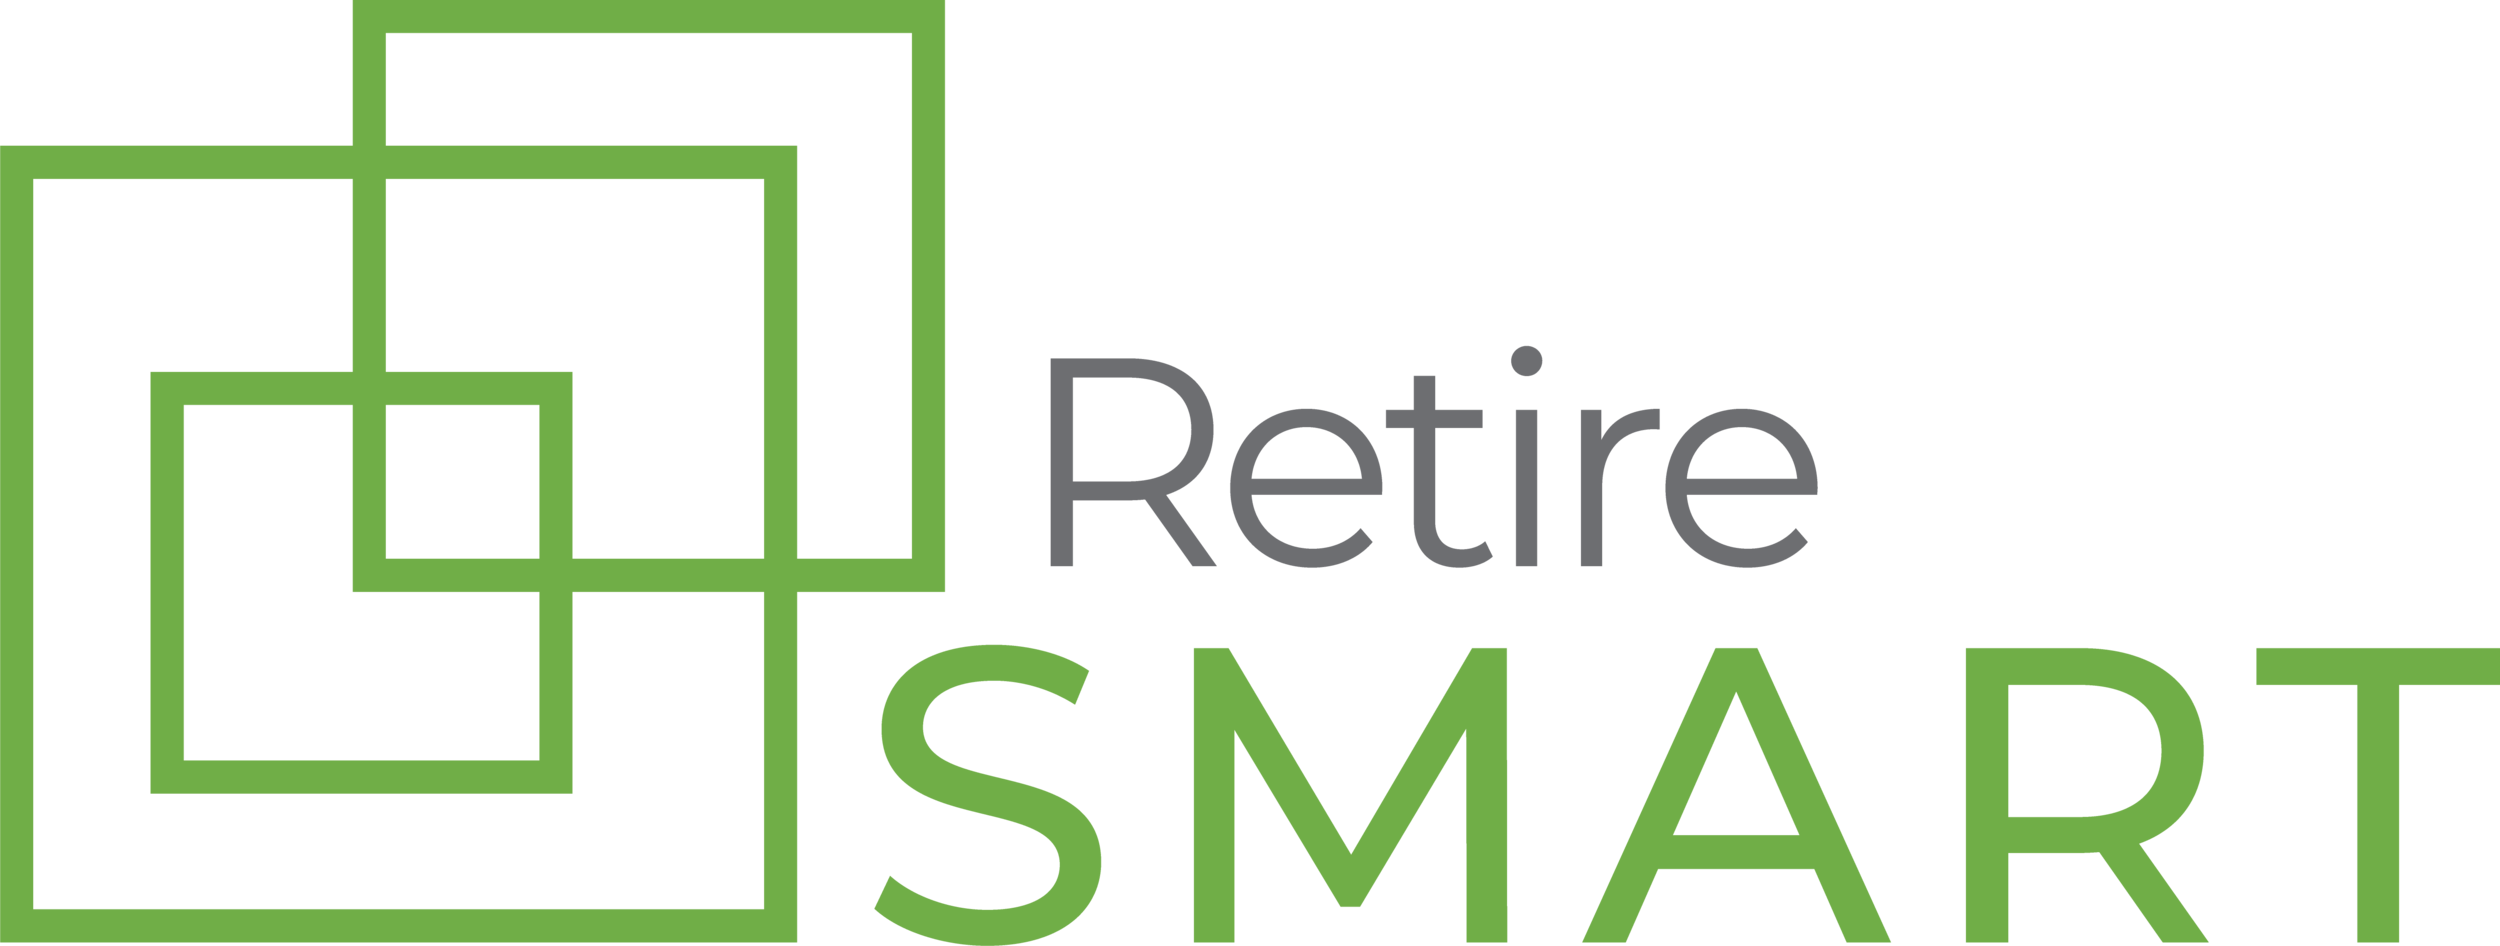 2021 Retire SMART Logo Official Stacked 112 173 71 (002).png